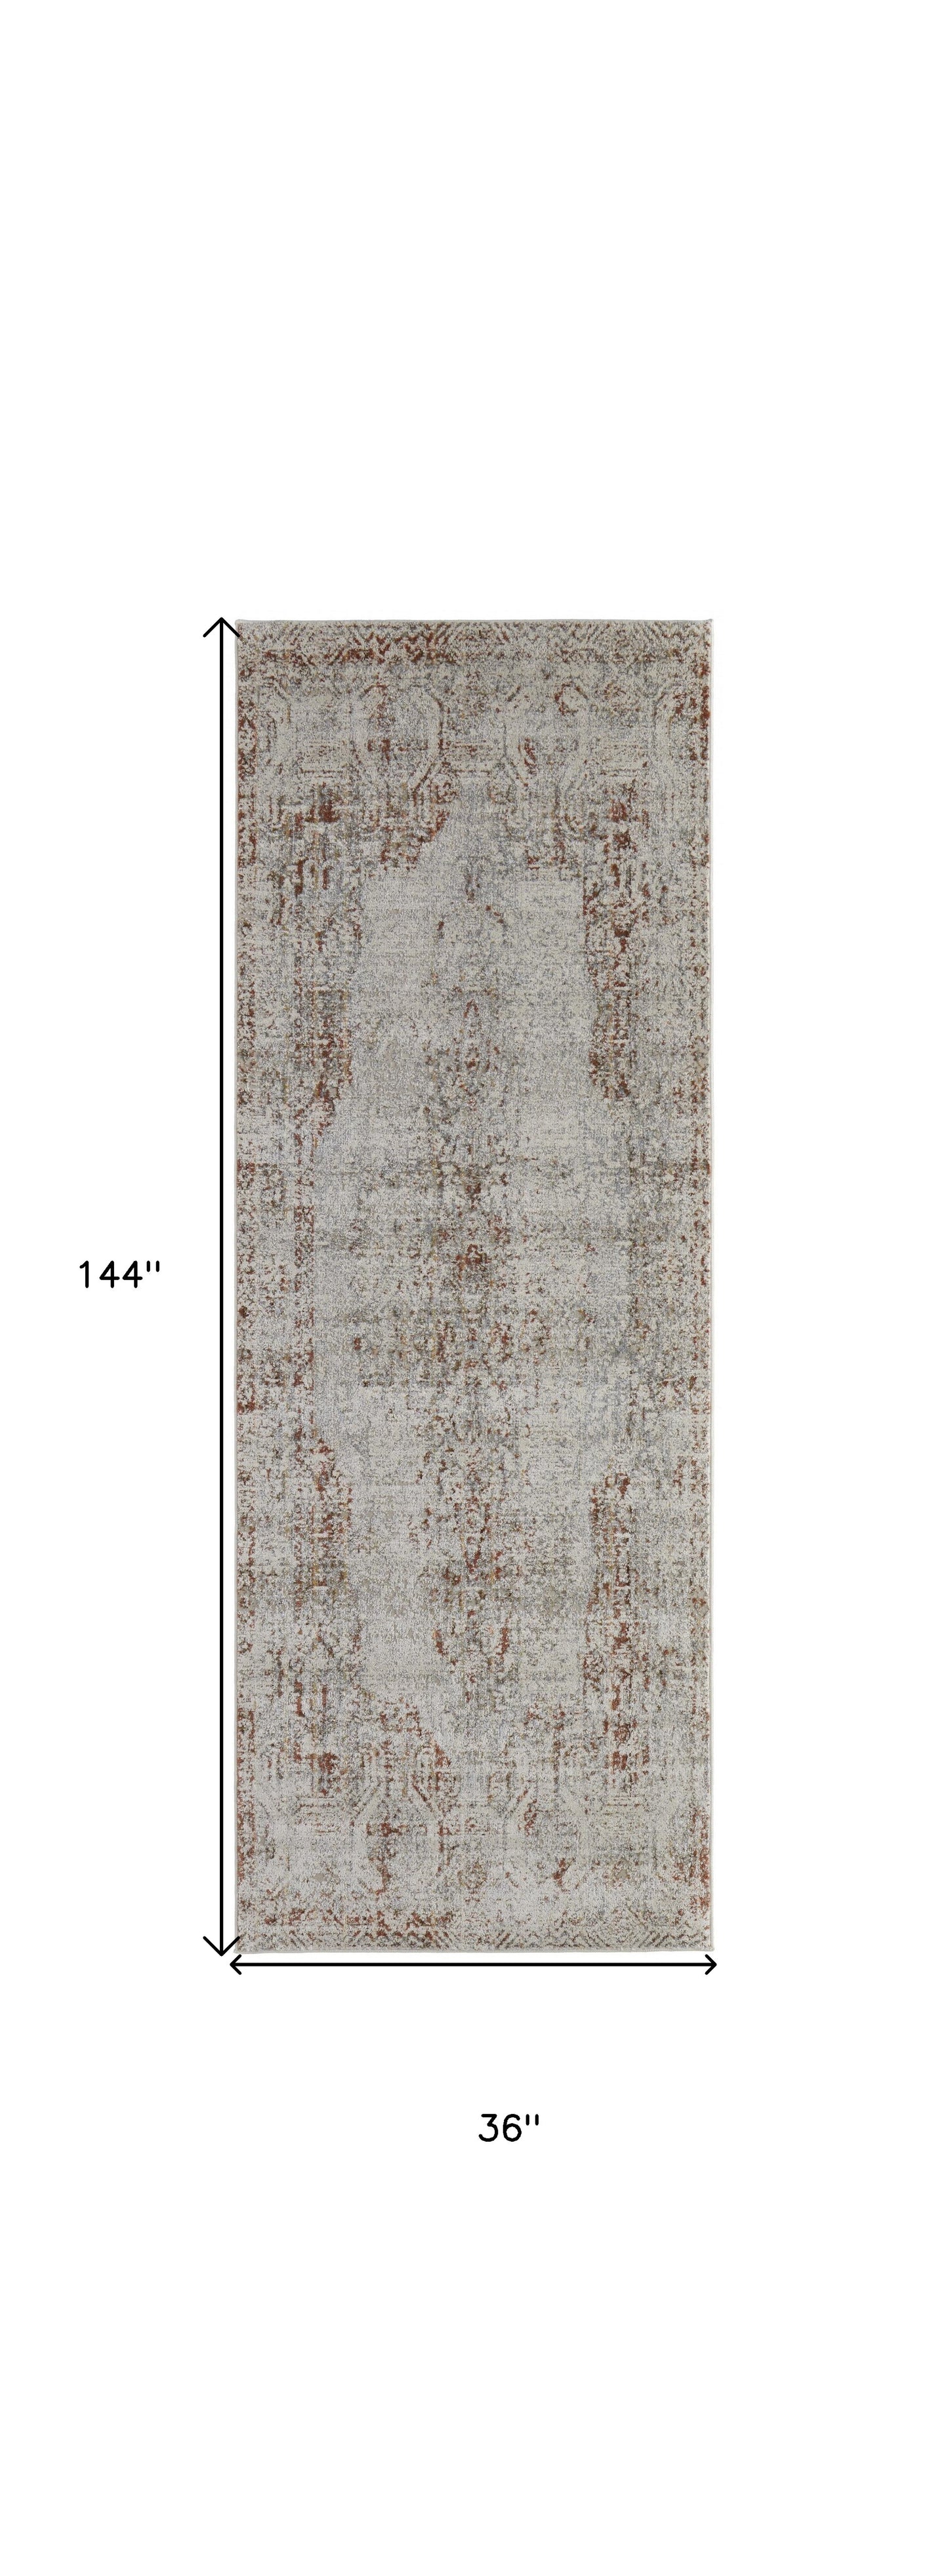 8' X 10' Tan Ivory And Orange Floral Power Loom Distressed Area Rug With Fringe